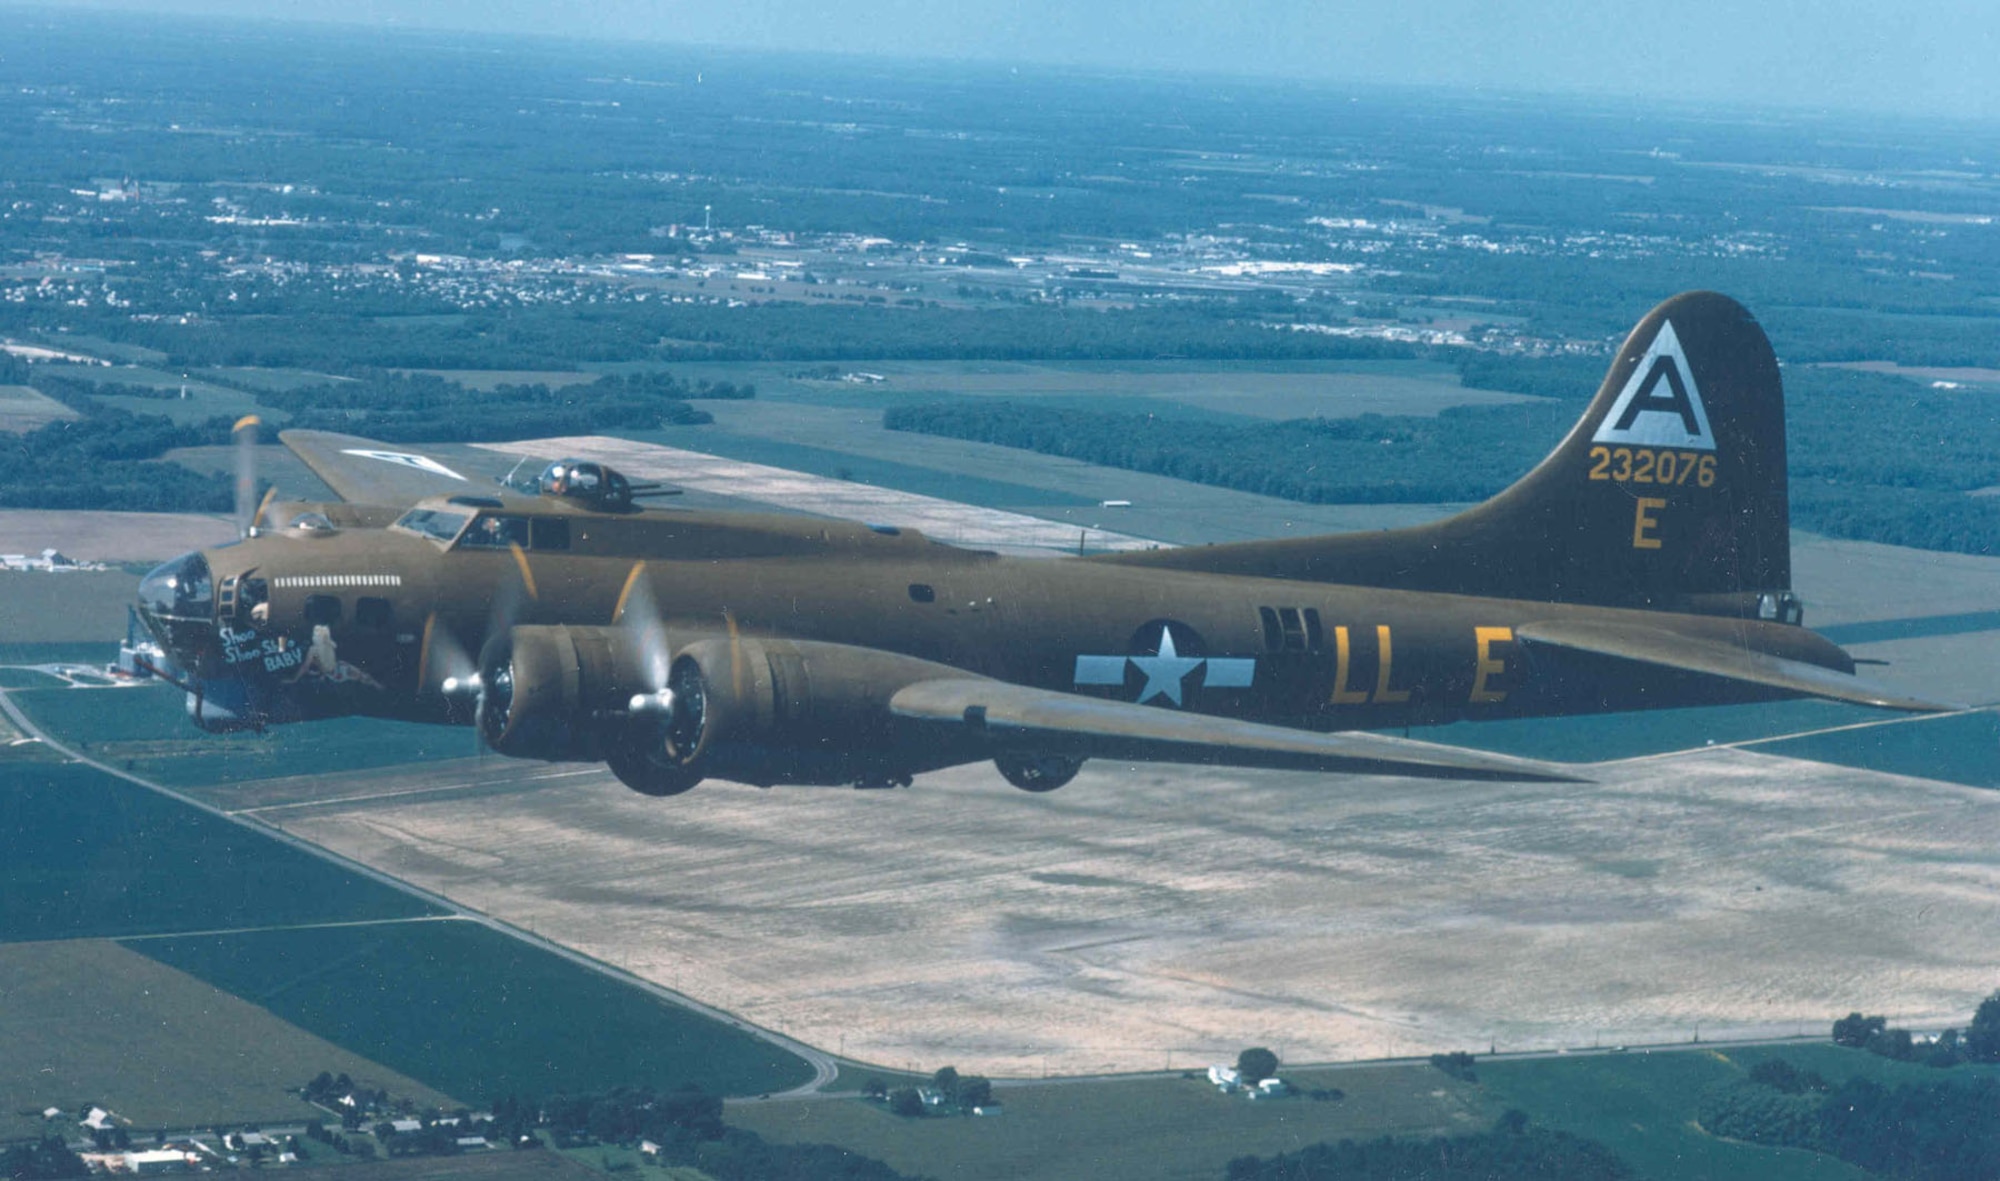 Boeing B-17G "Shoo Shoo Shoo Baby" en route to the National Museum of the United States Air Force on Oct. 12, 1988. (U.S. Air Force photo)